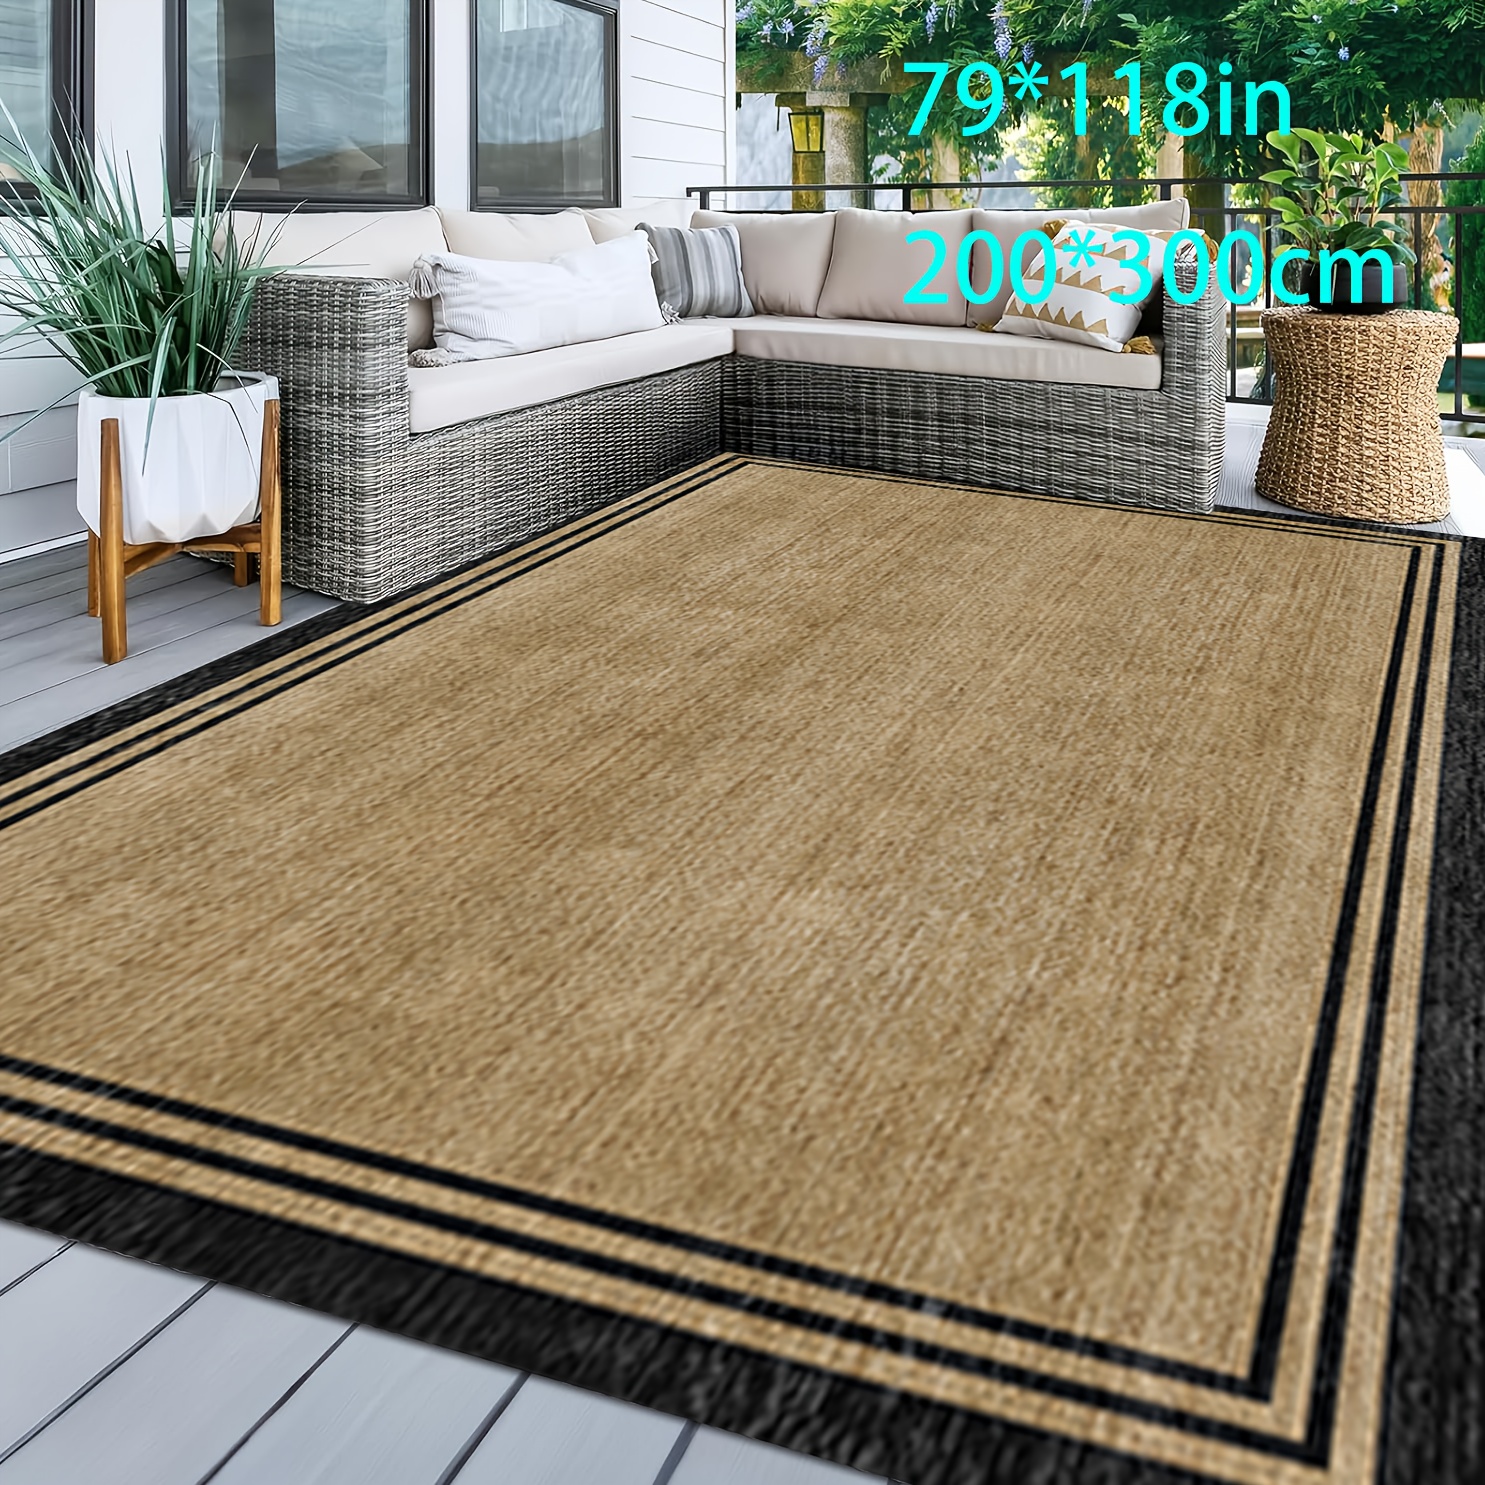 

Water-resistant, Stain-resistant Polyester Outdoor Rug - Low Pile, Rectangle, Machine Washable, Non-slip Cotton Backing, Multi-size, Ideal For Patio, Deck, Living Room, Bedroom & Entrance